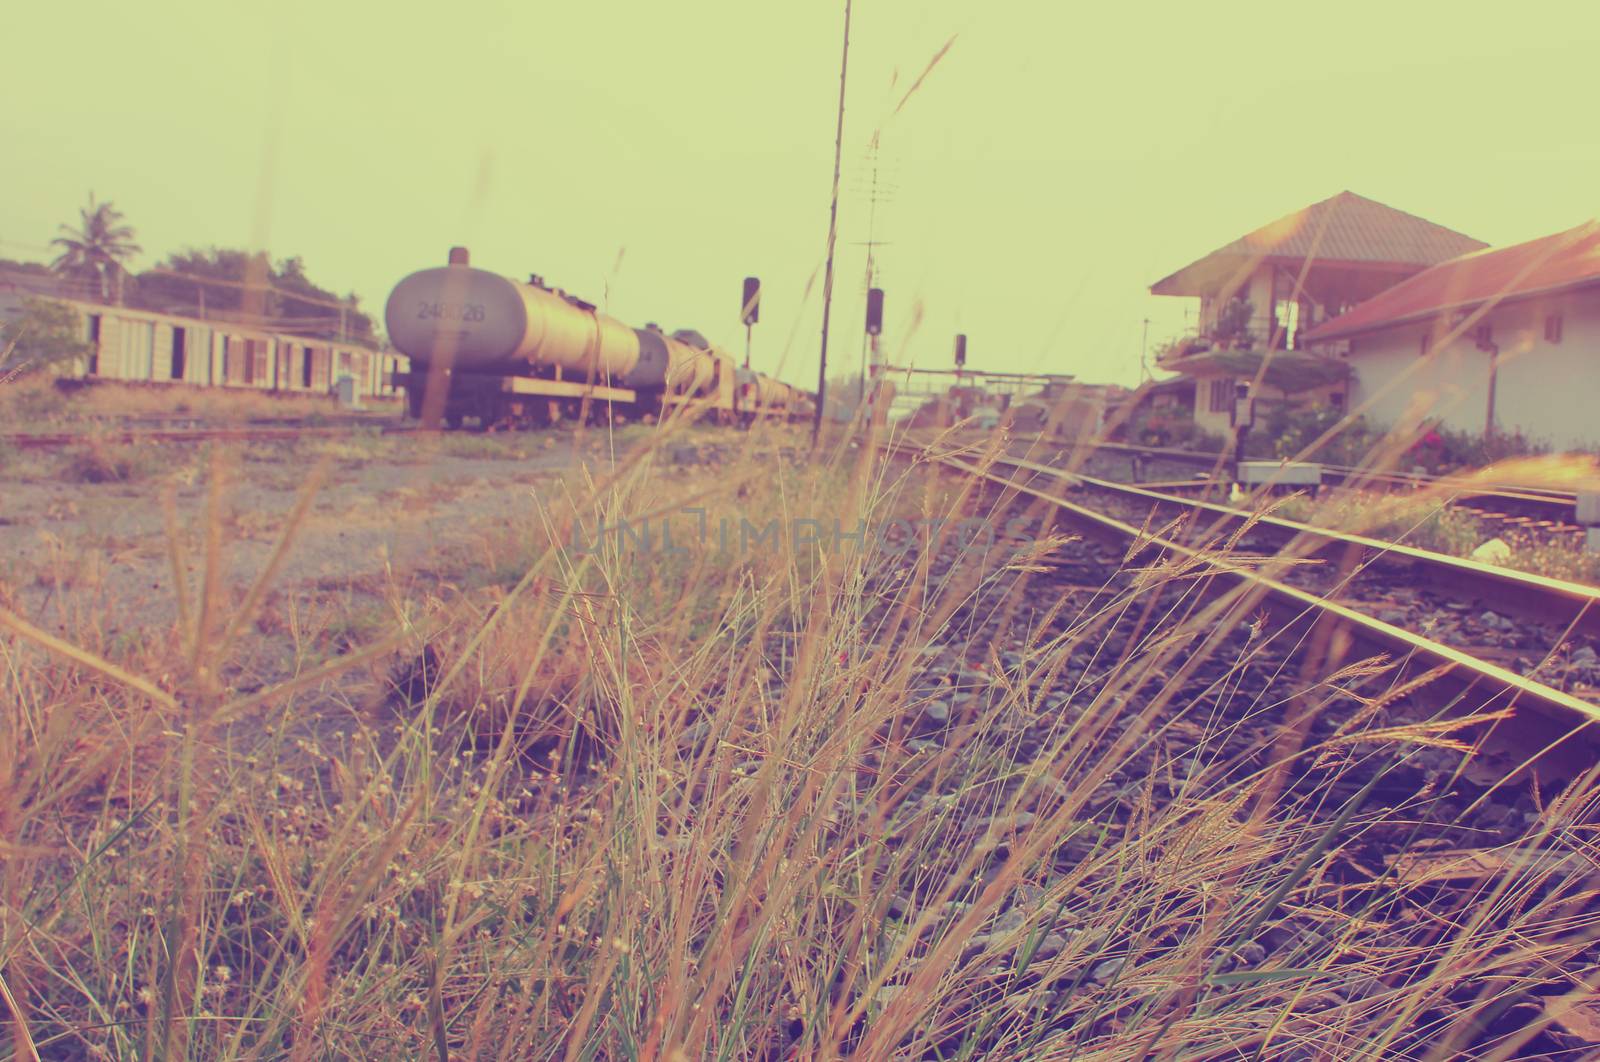 Old railway station with retro filter effect by nuchylee